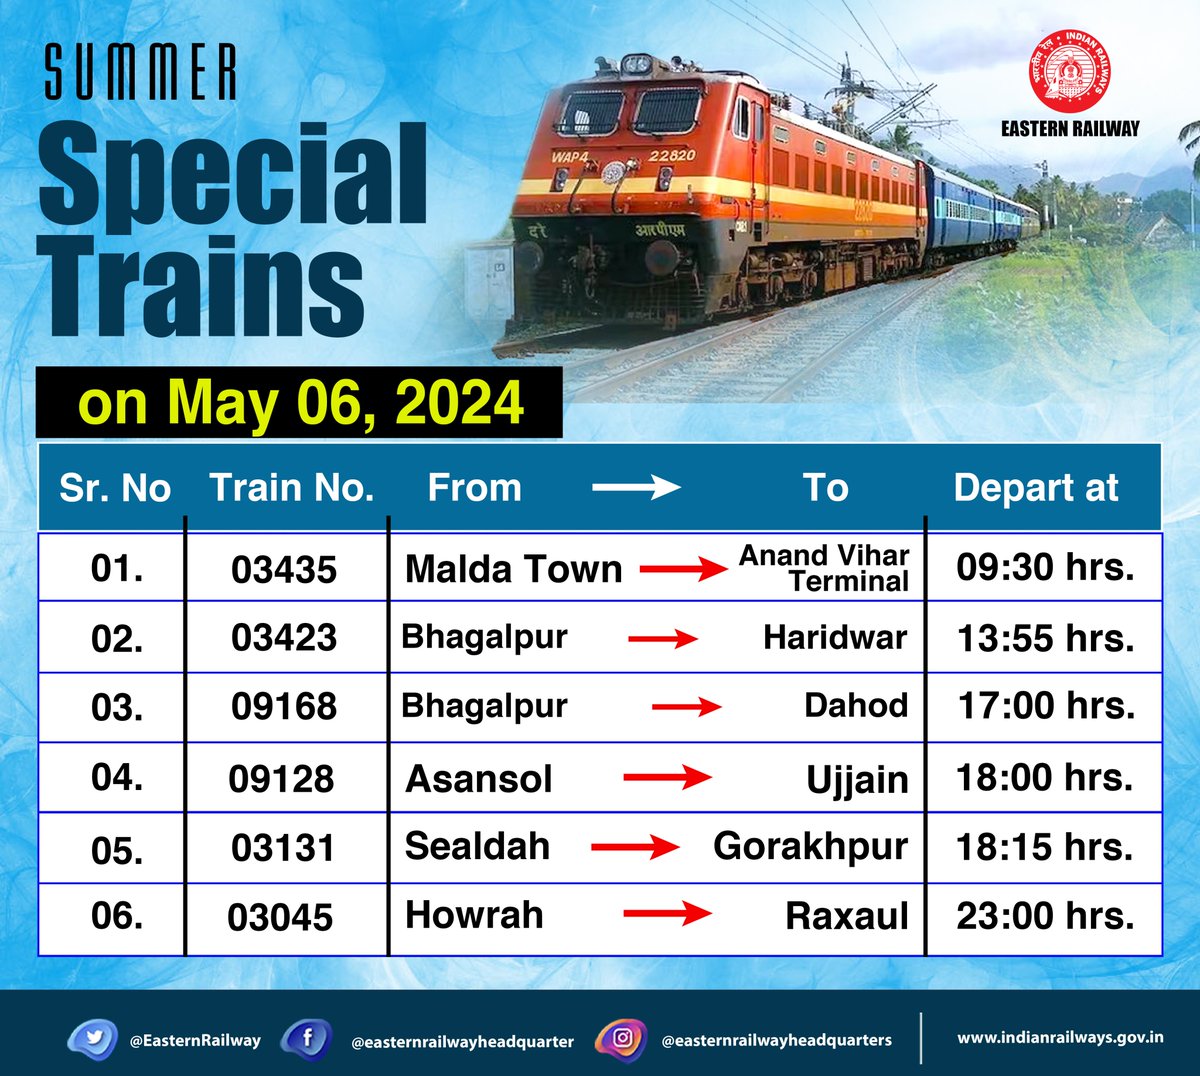 Summer Special Trains on May 06, 2024